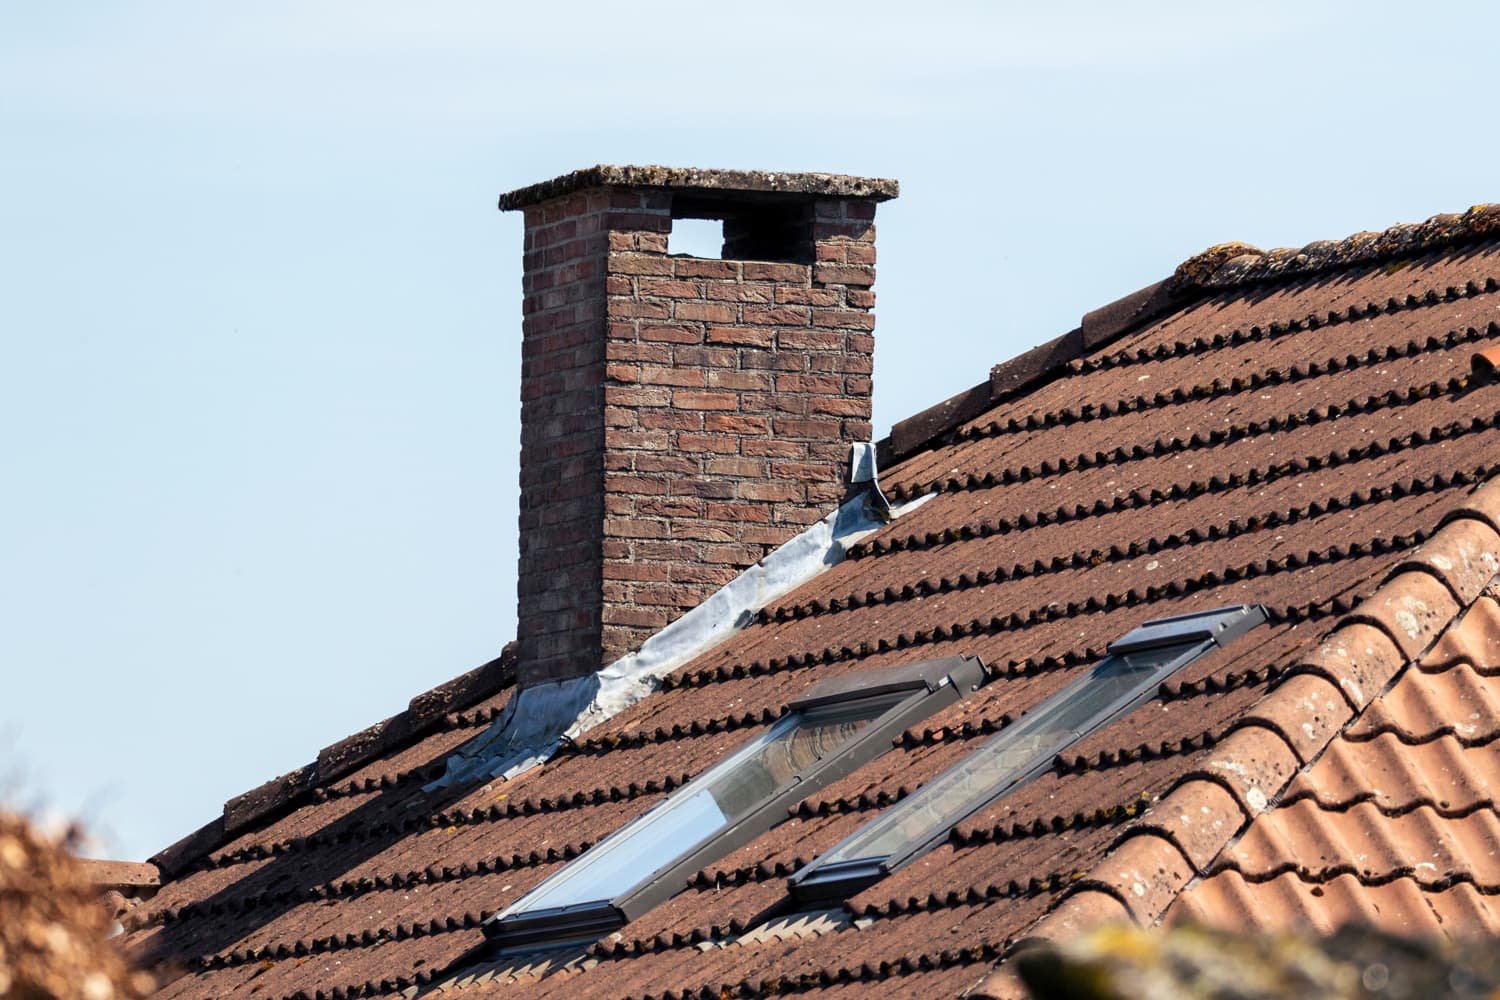 A portrait of a chimney on a roof of a house. The roof has ceramic tiles 